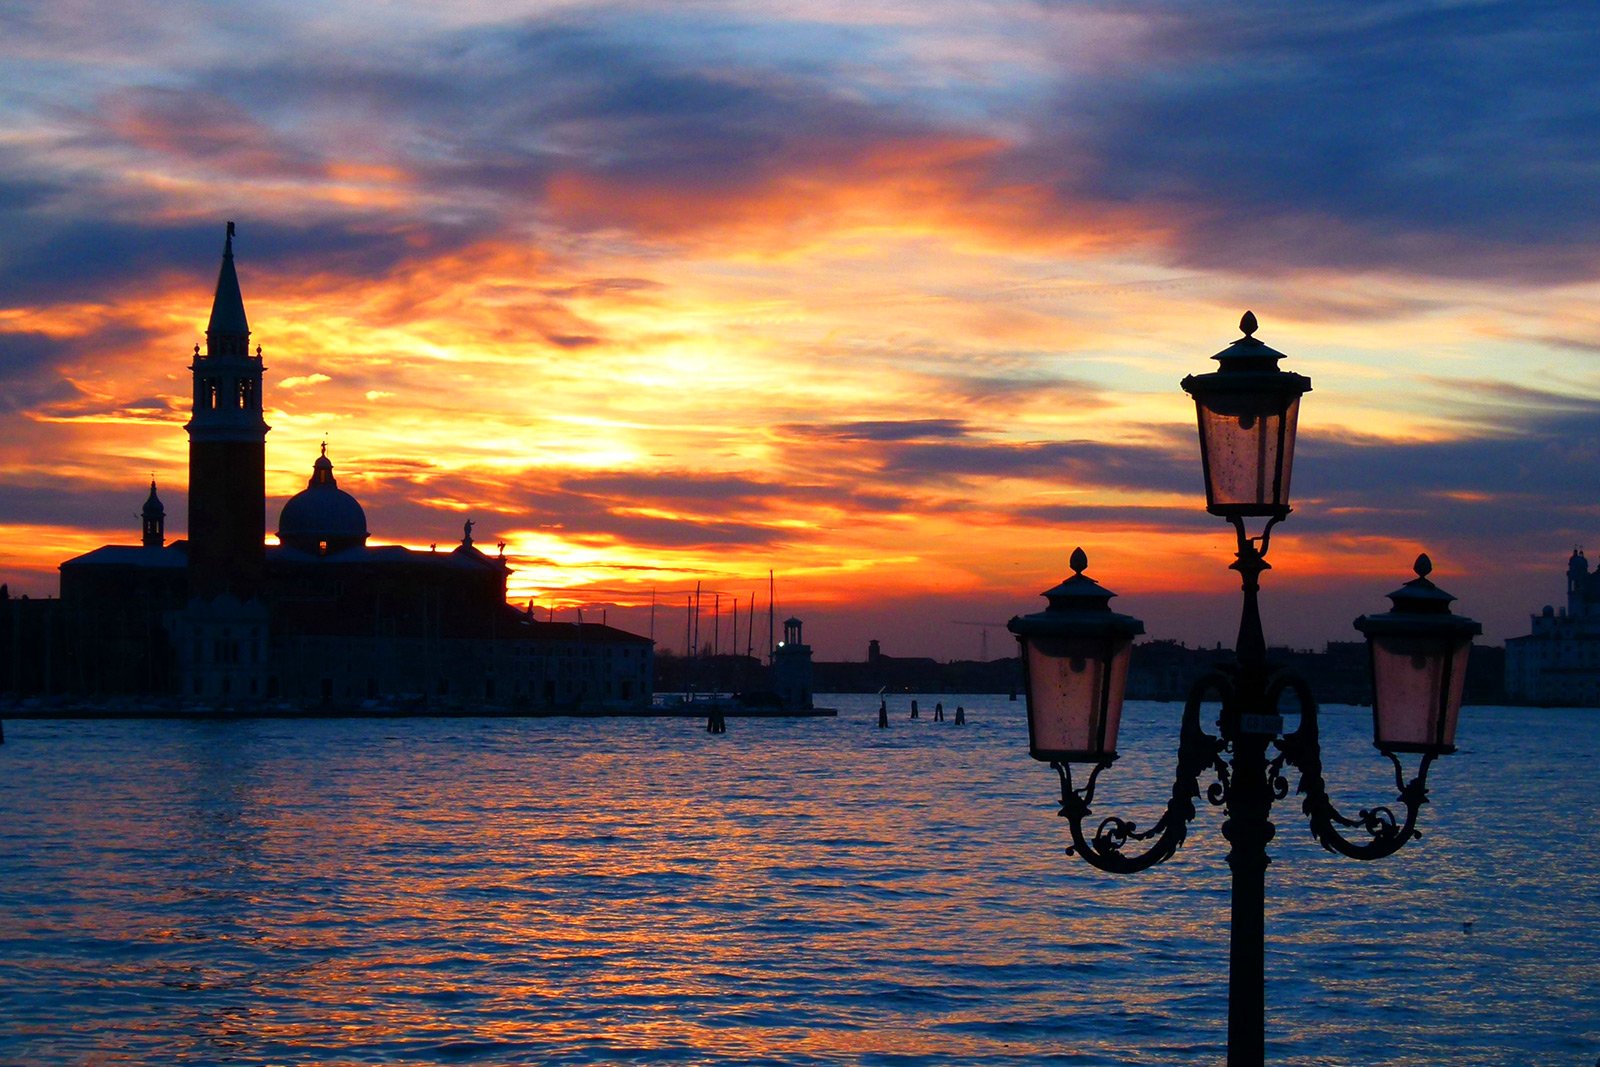 How to see a sunset on the waterfront in Venice